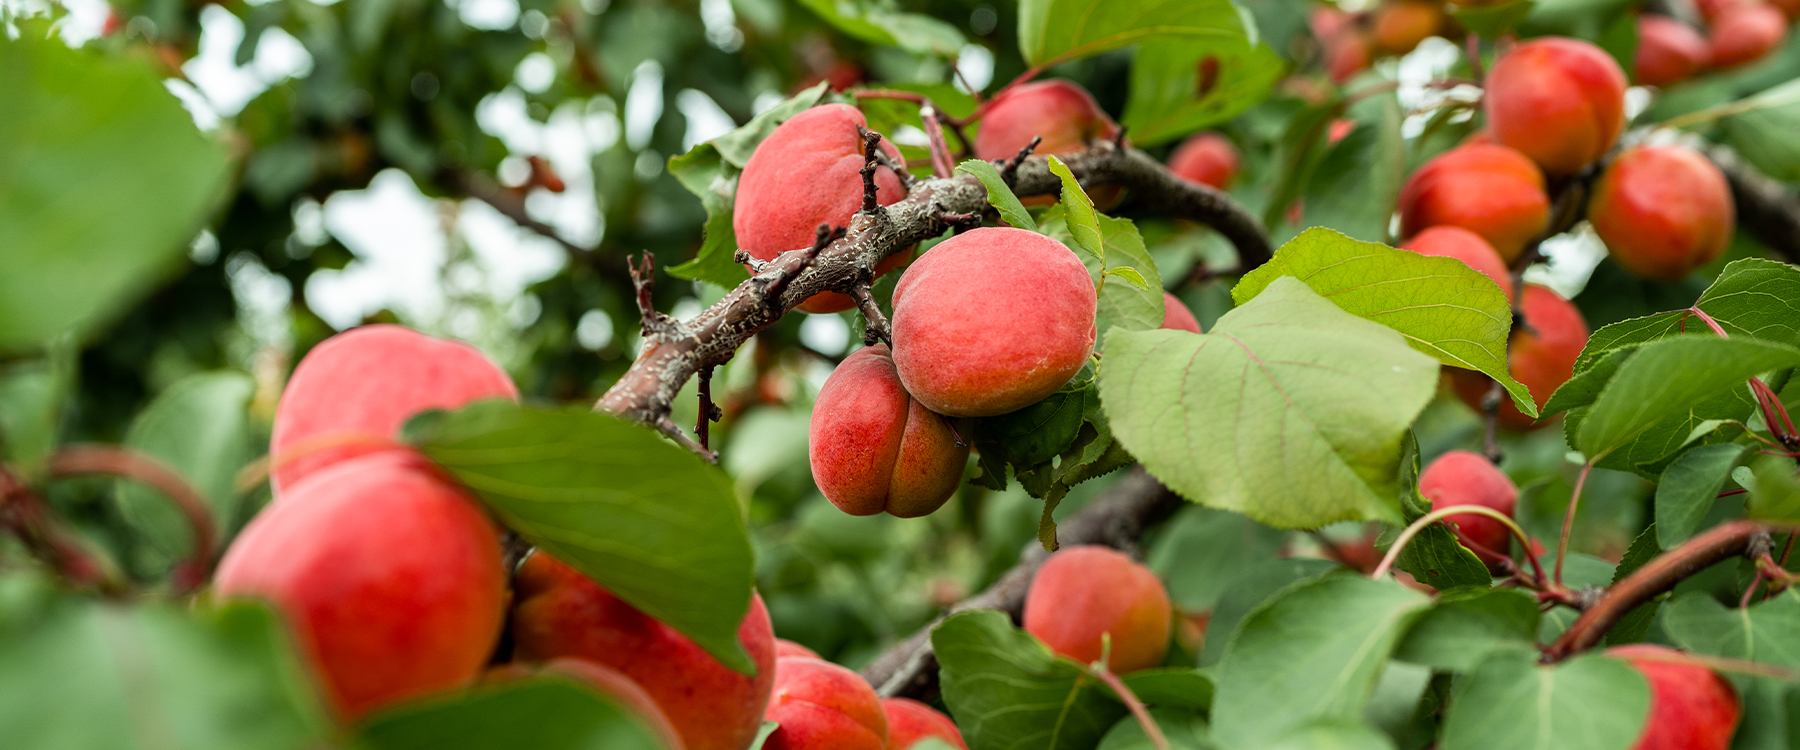 How to Prune Fruit Trees: Cutting Dead Branches